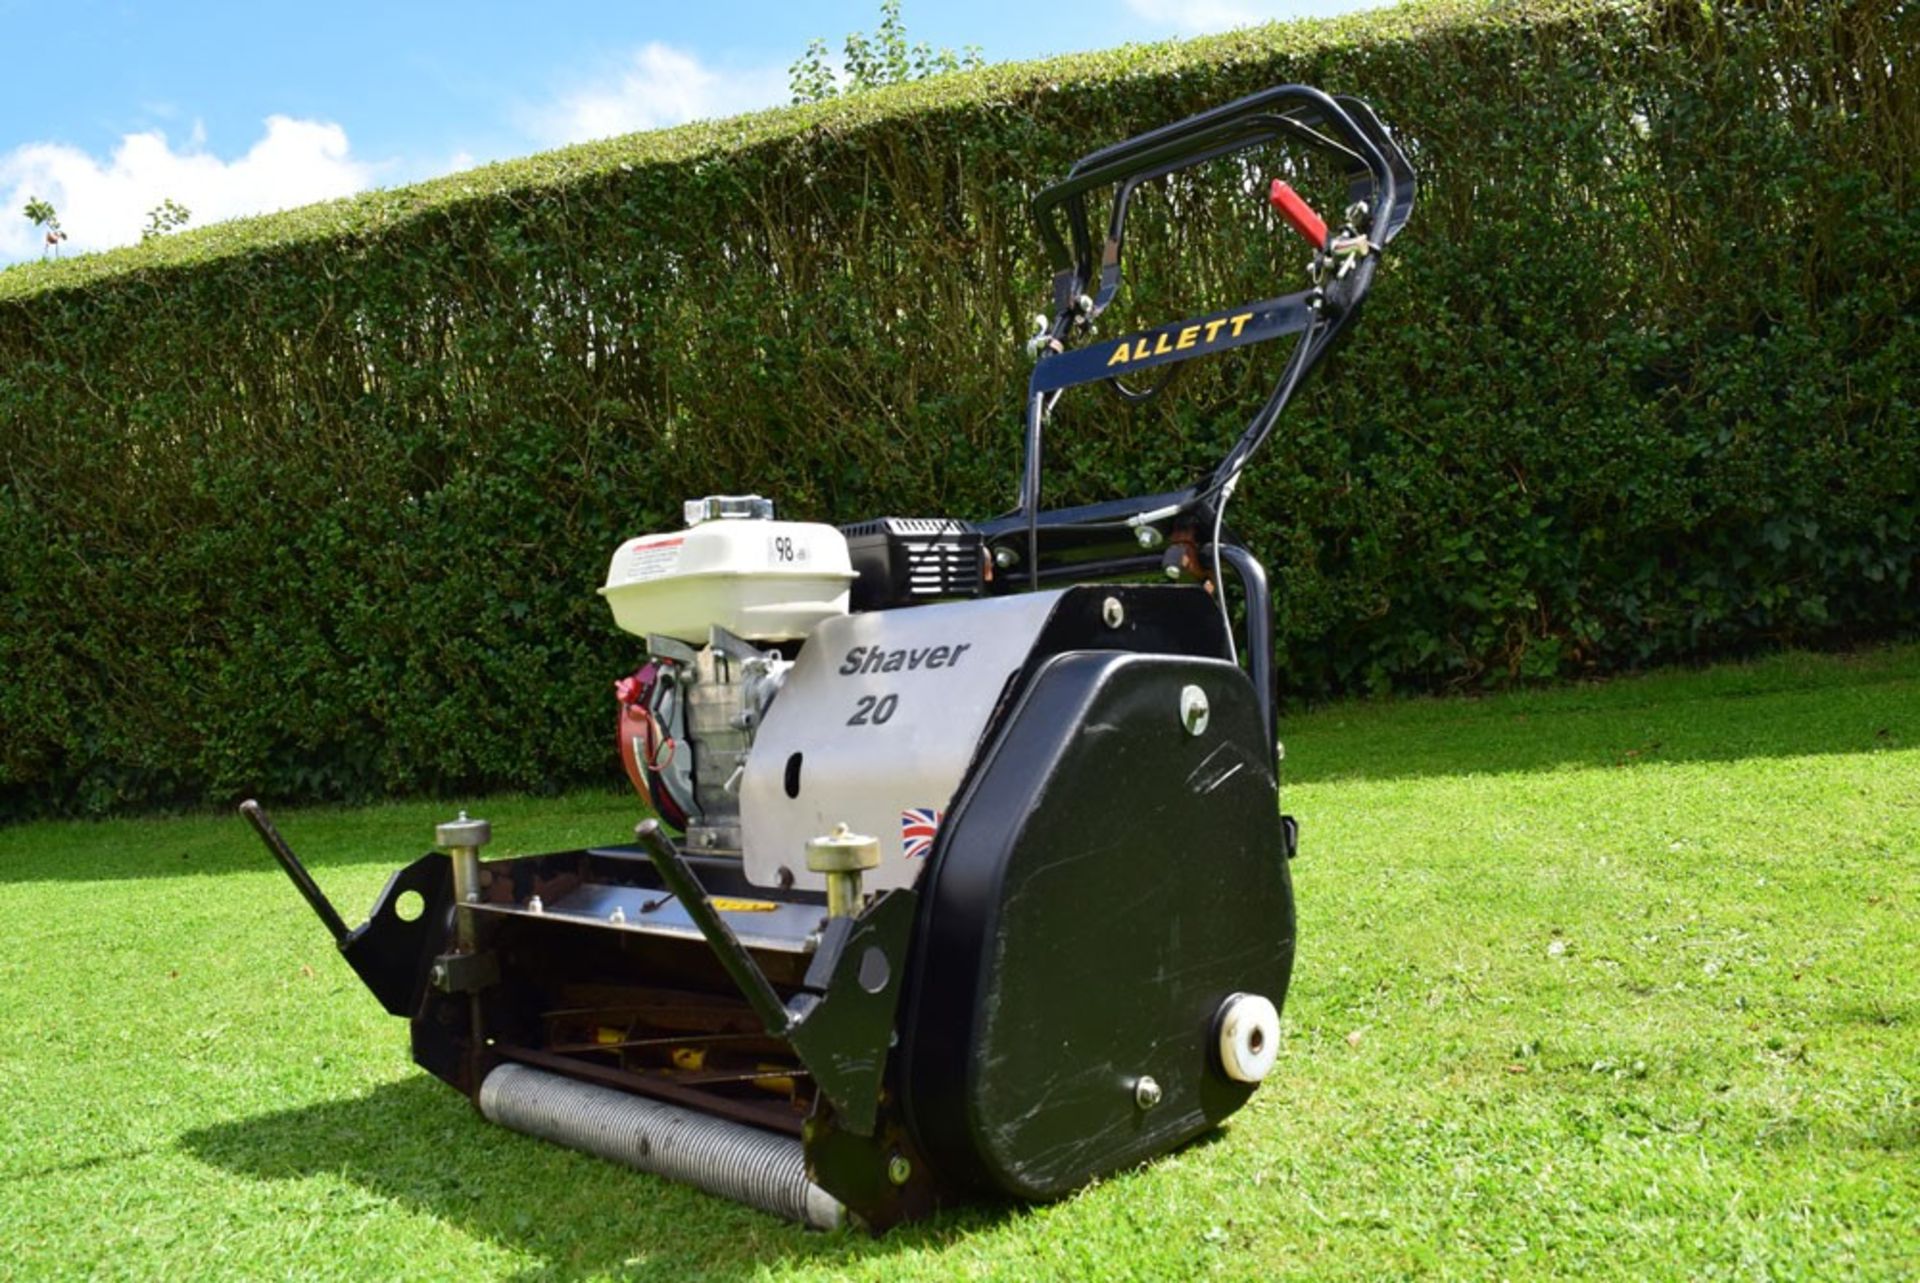 2012 Allett Shaver 20, 10 Blade Cylinder Mower With Grass Box - Image 4 of 9